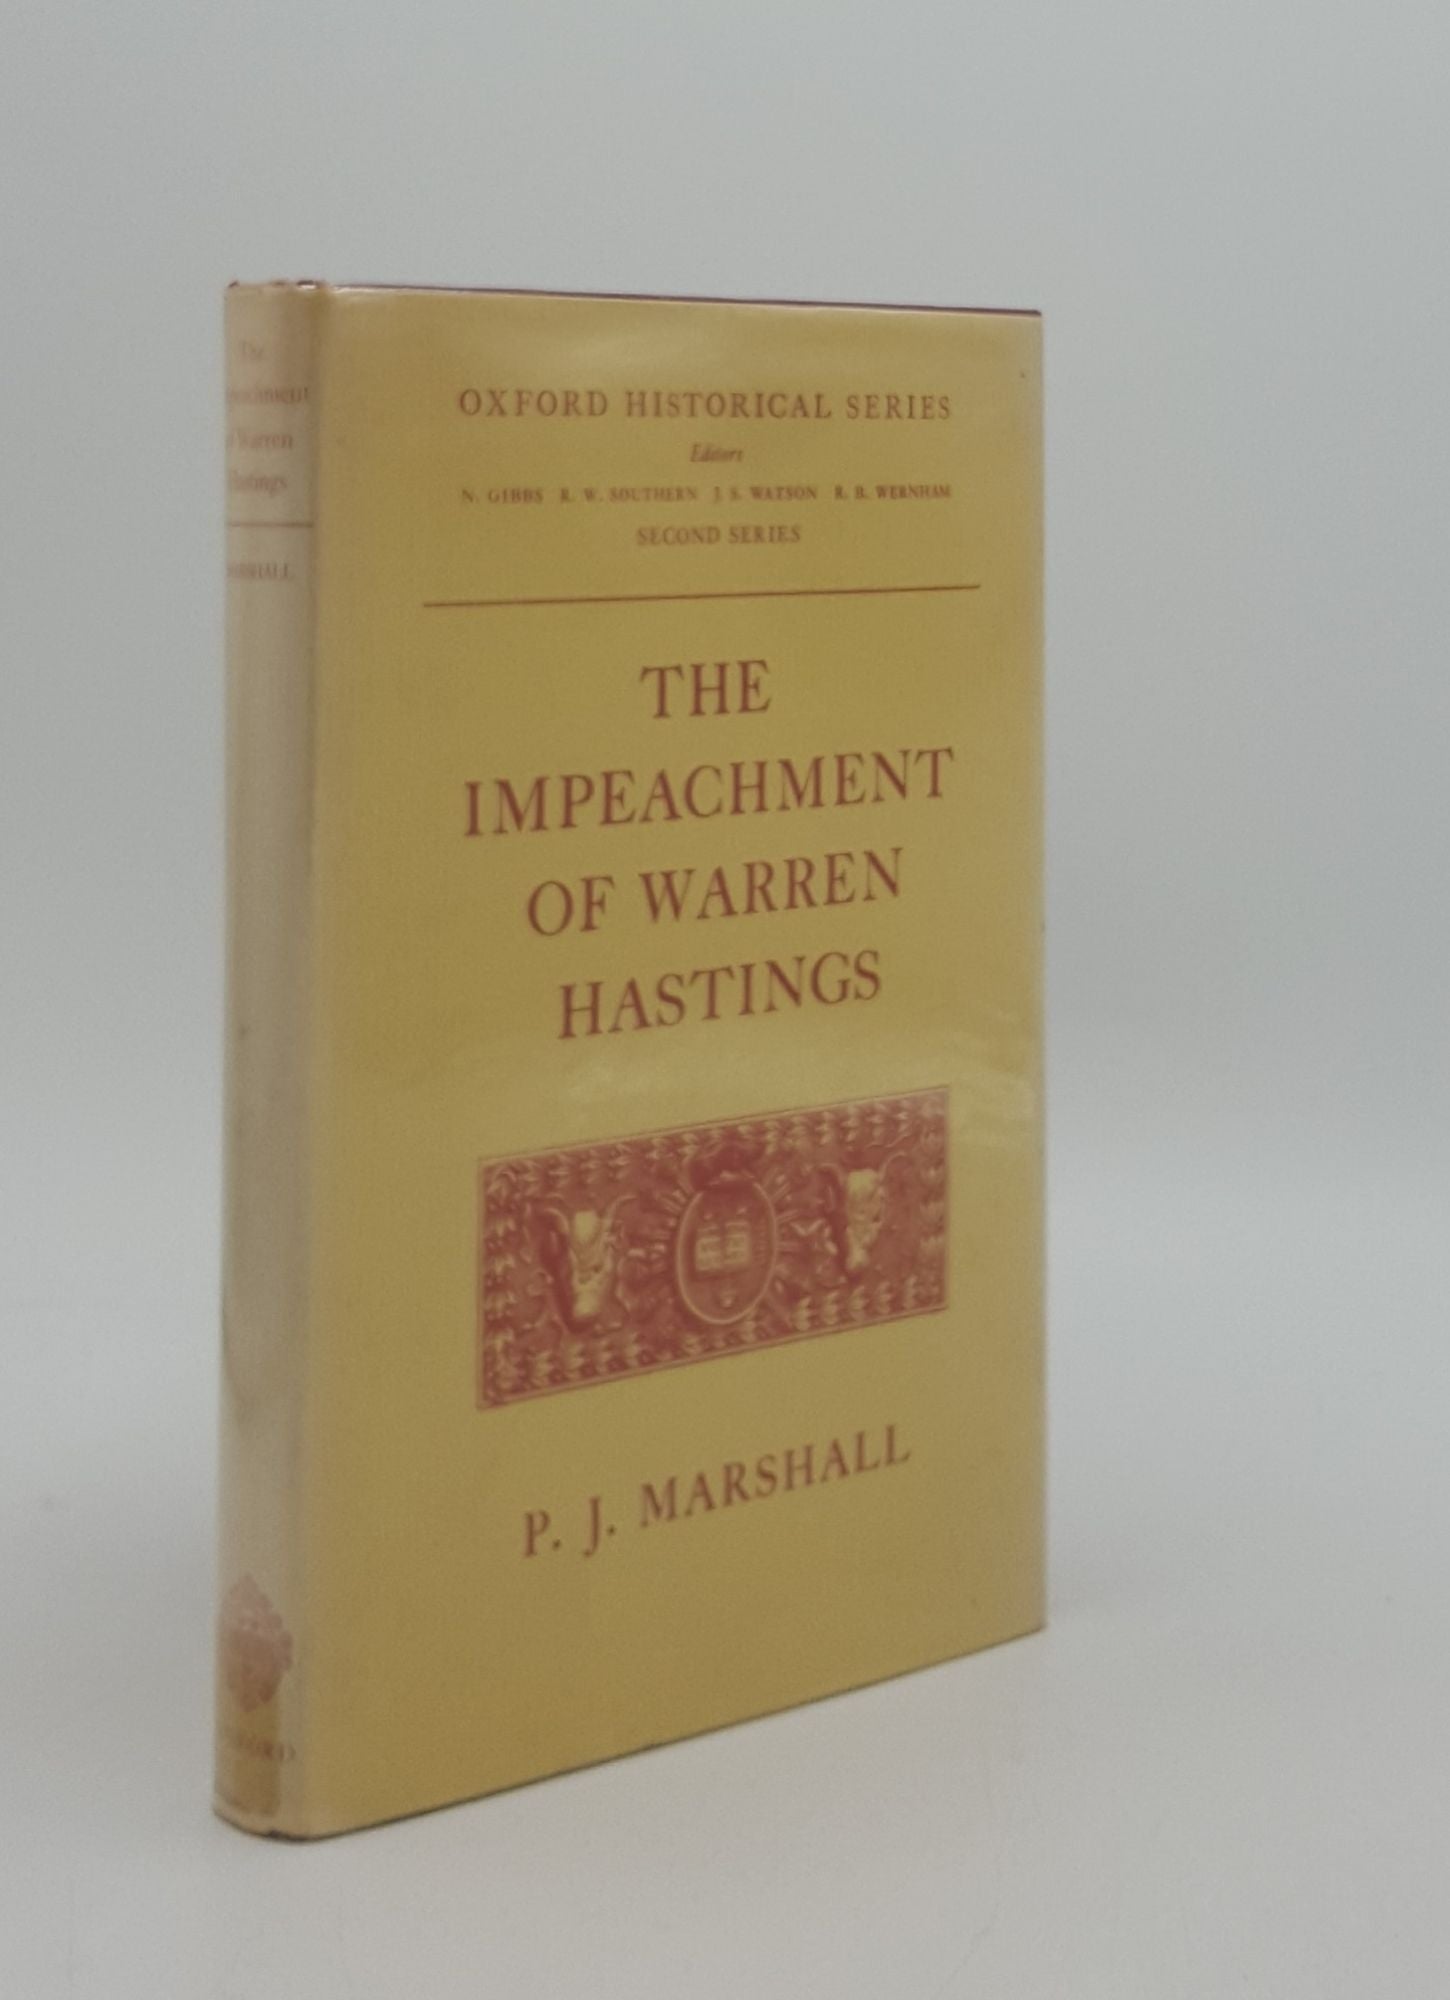 MARSHALL P. J. - The Impeachment of Warren Hastings